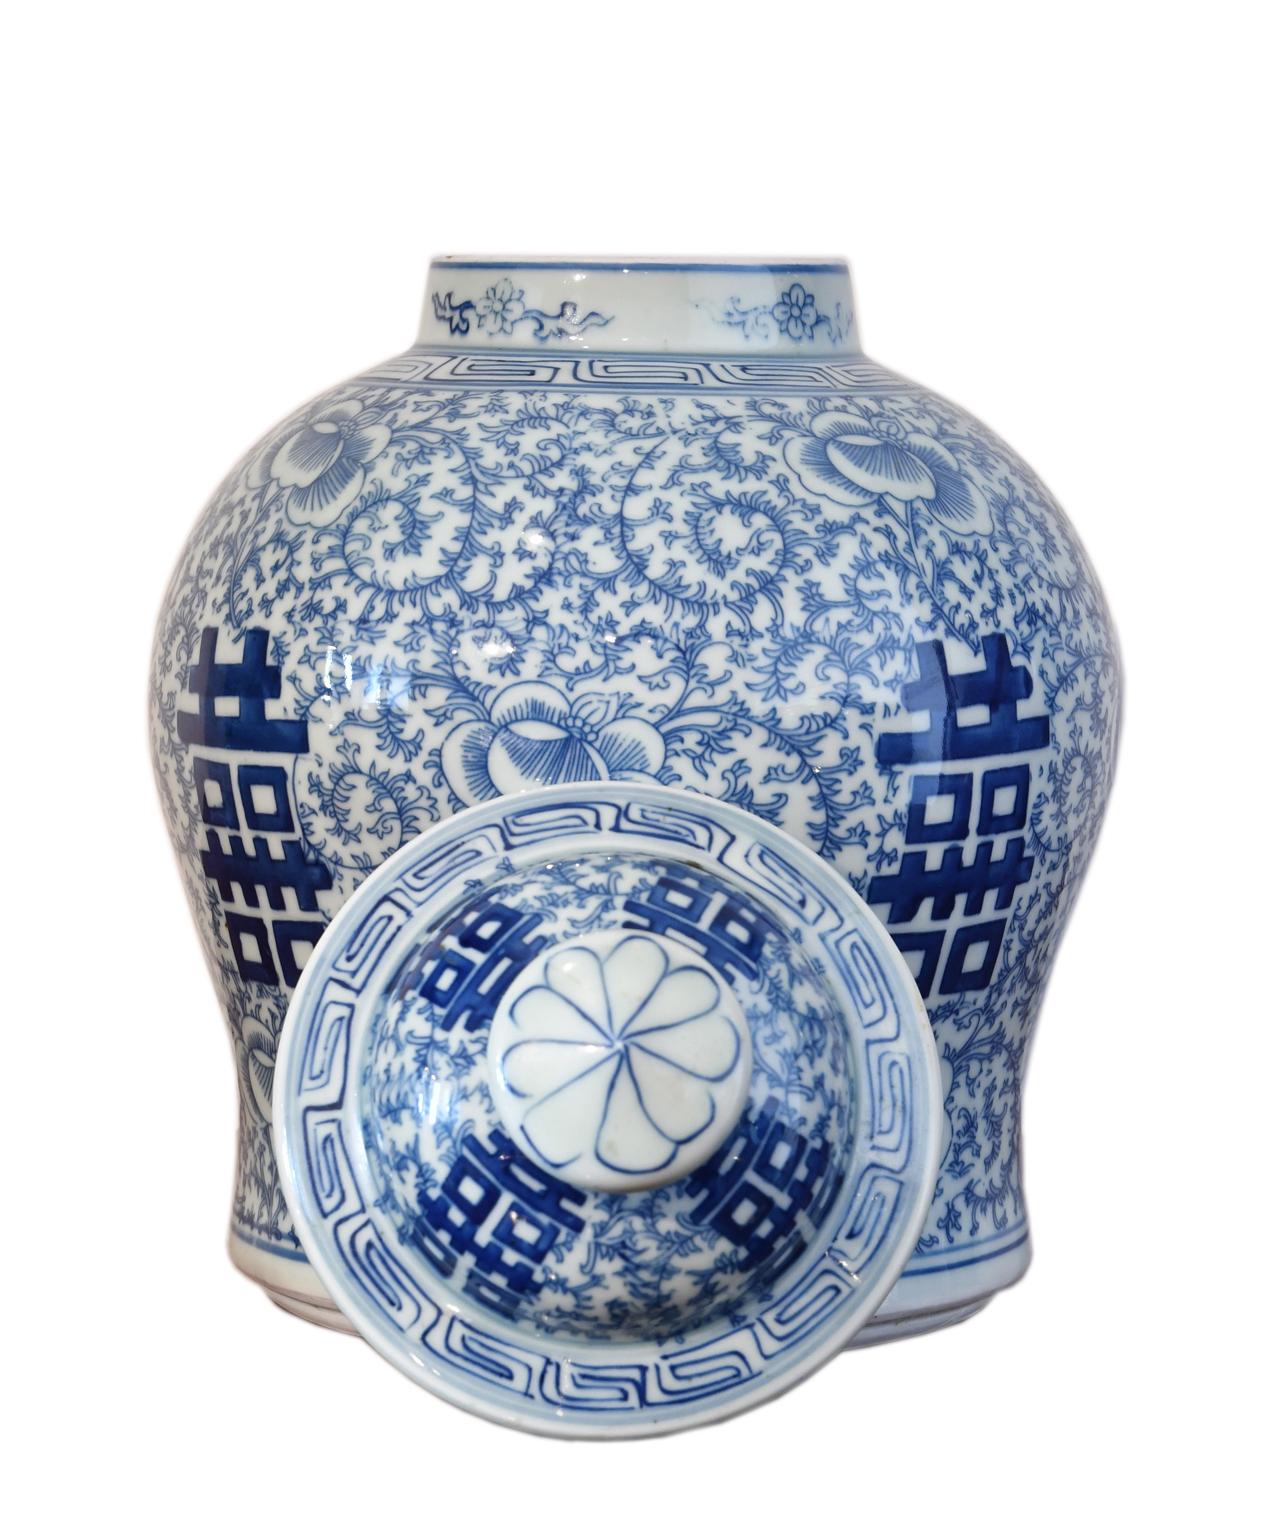 Glazed Qing Chinese Porcelain Blue & White Lidded Jar w/ Shuang-xi or Double Happiness For Sale